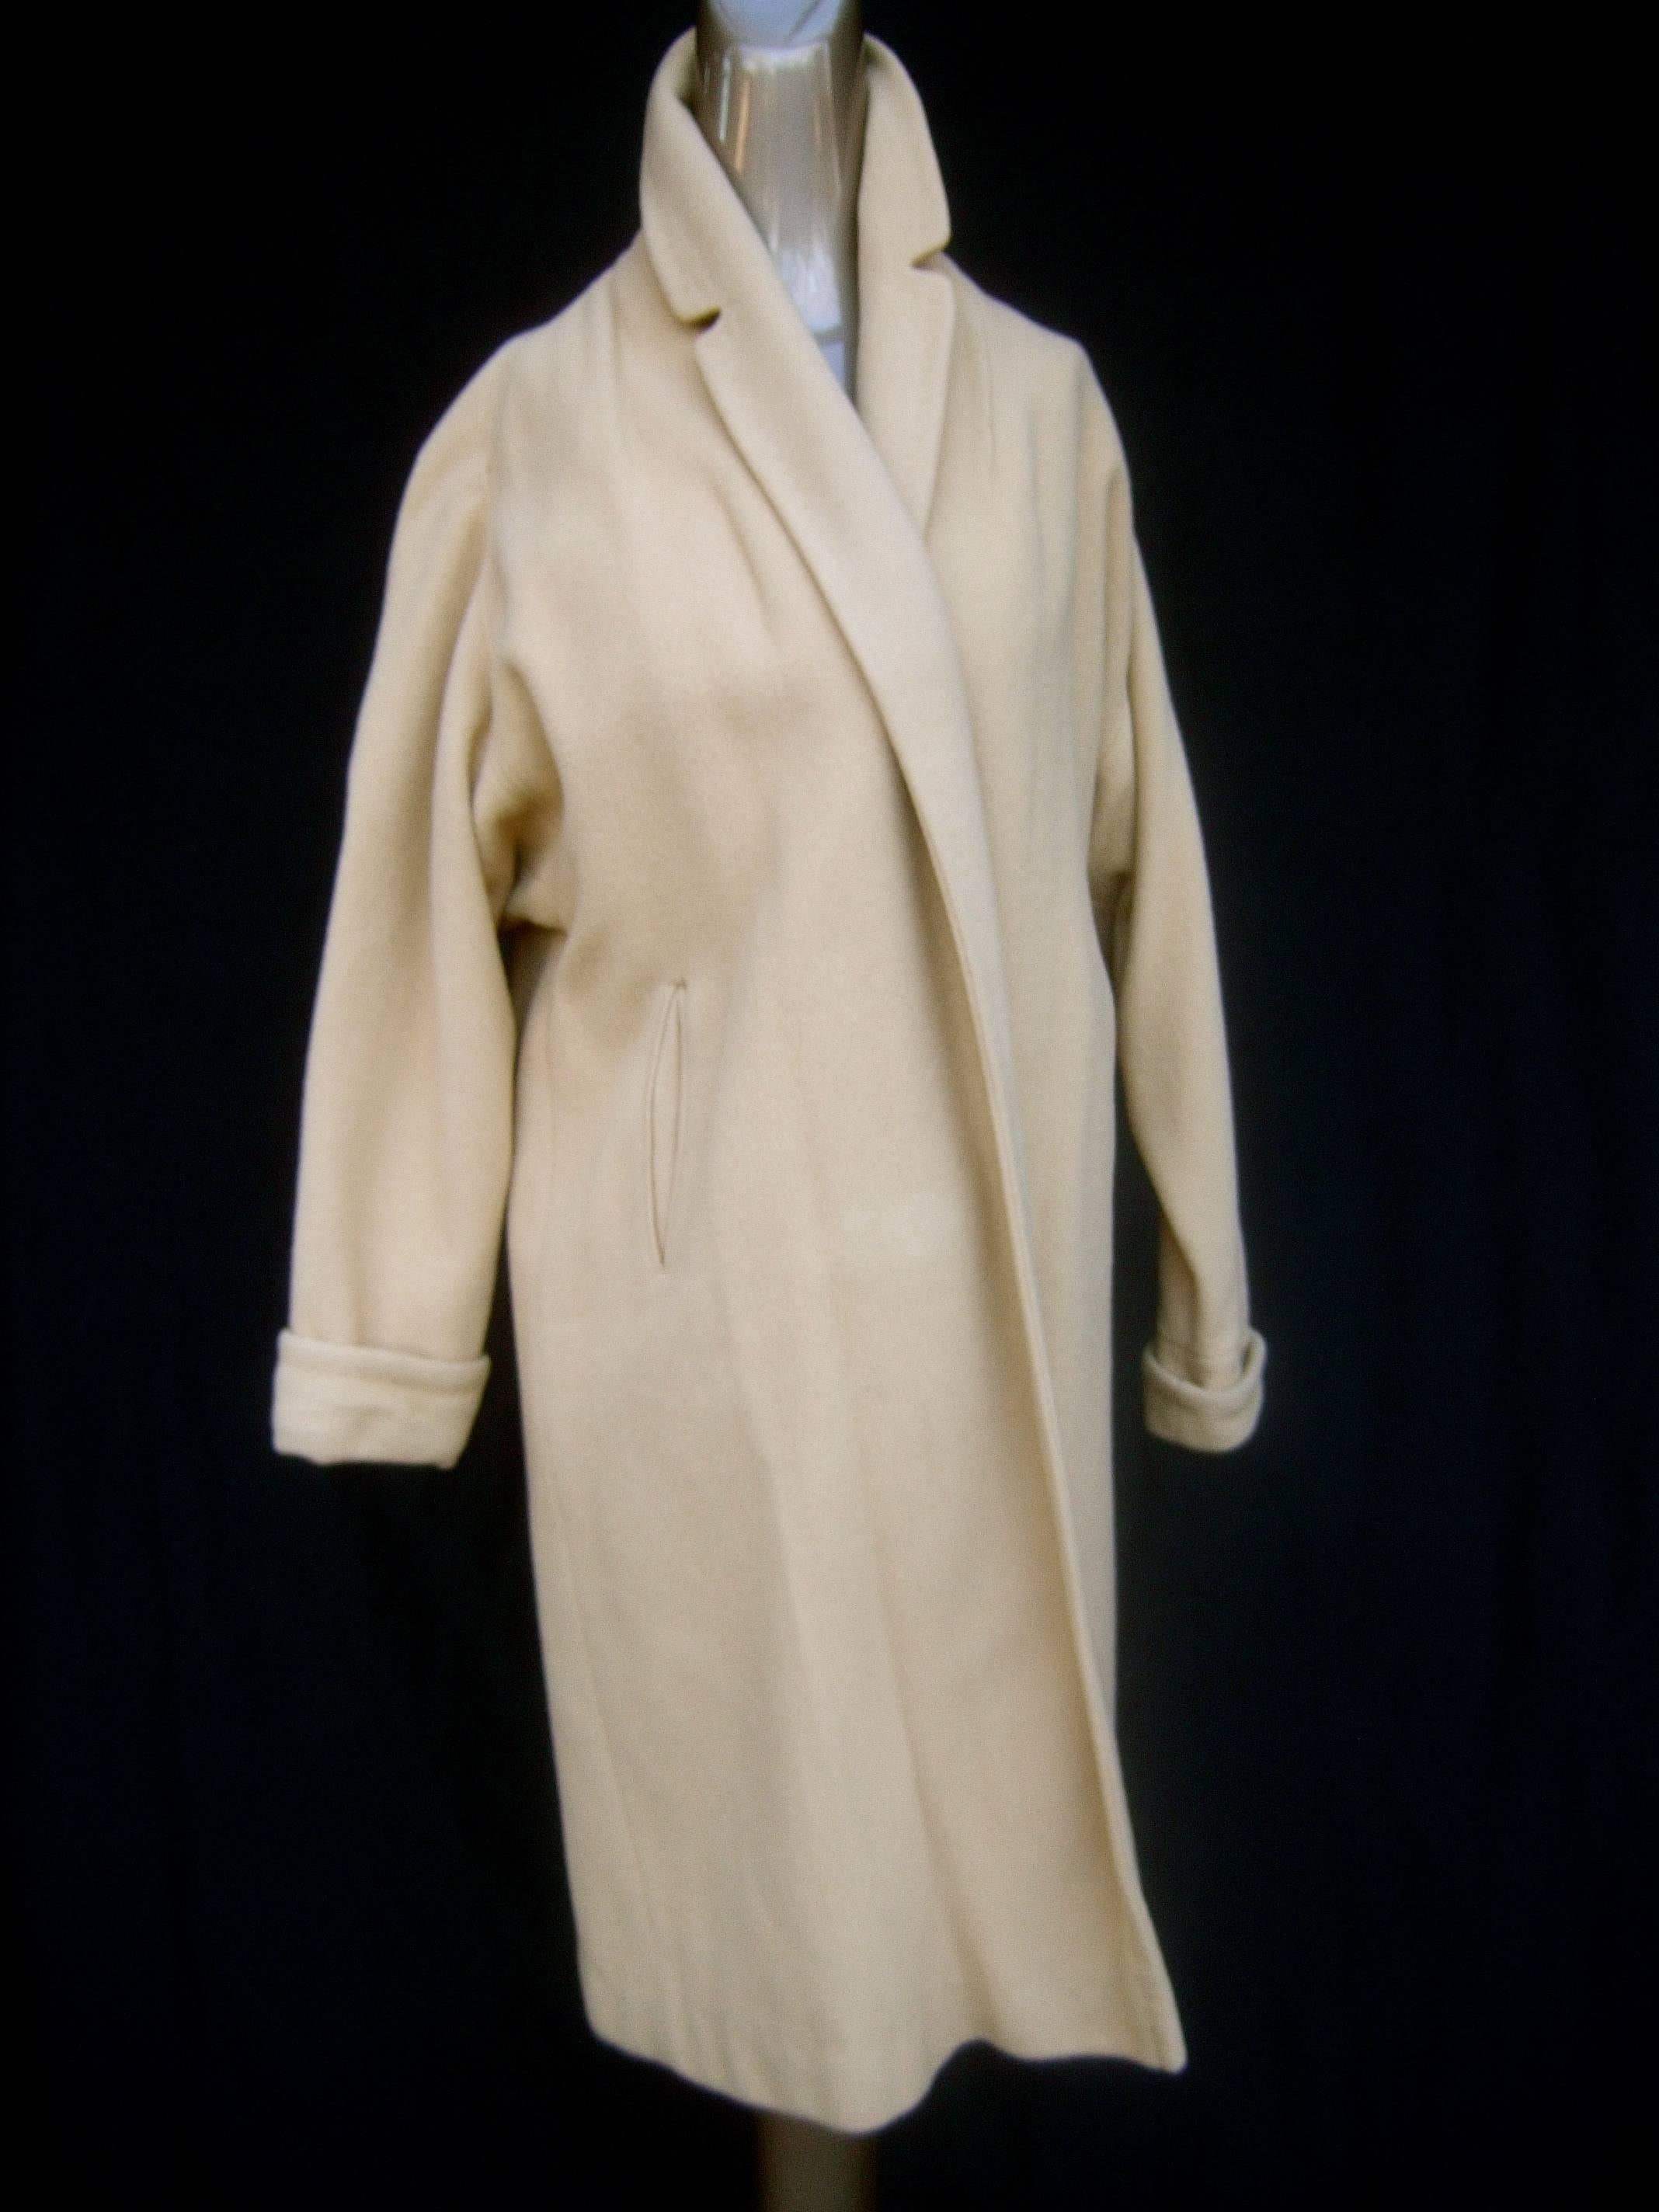 1960s Luxurious plush tan cashmere swing coat c 1960
The stylish mid-century coat is designed with soft
tan cashmere 

The retro coat is designed without buttons, closures
or a belt. Drapes over the body and partially reveals 
the garments worn